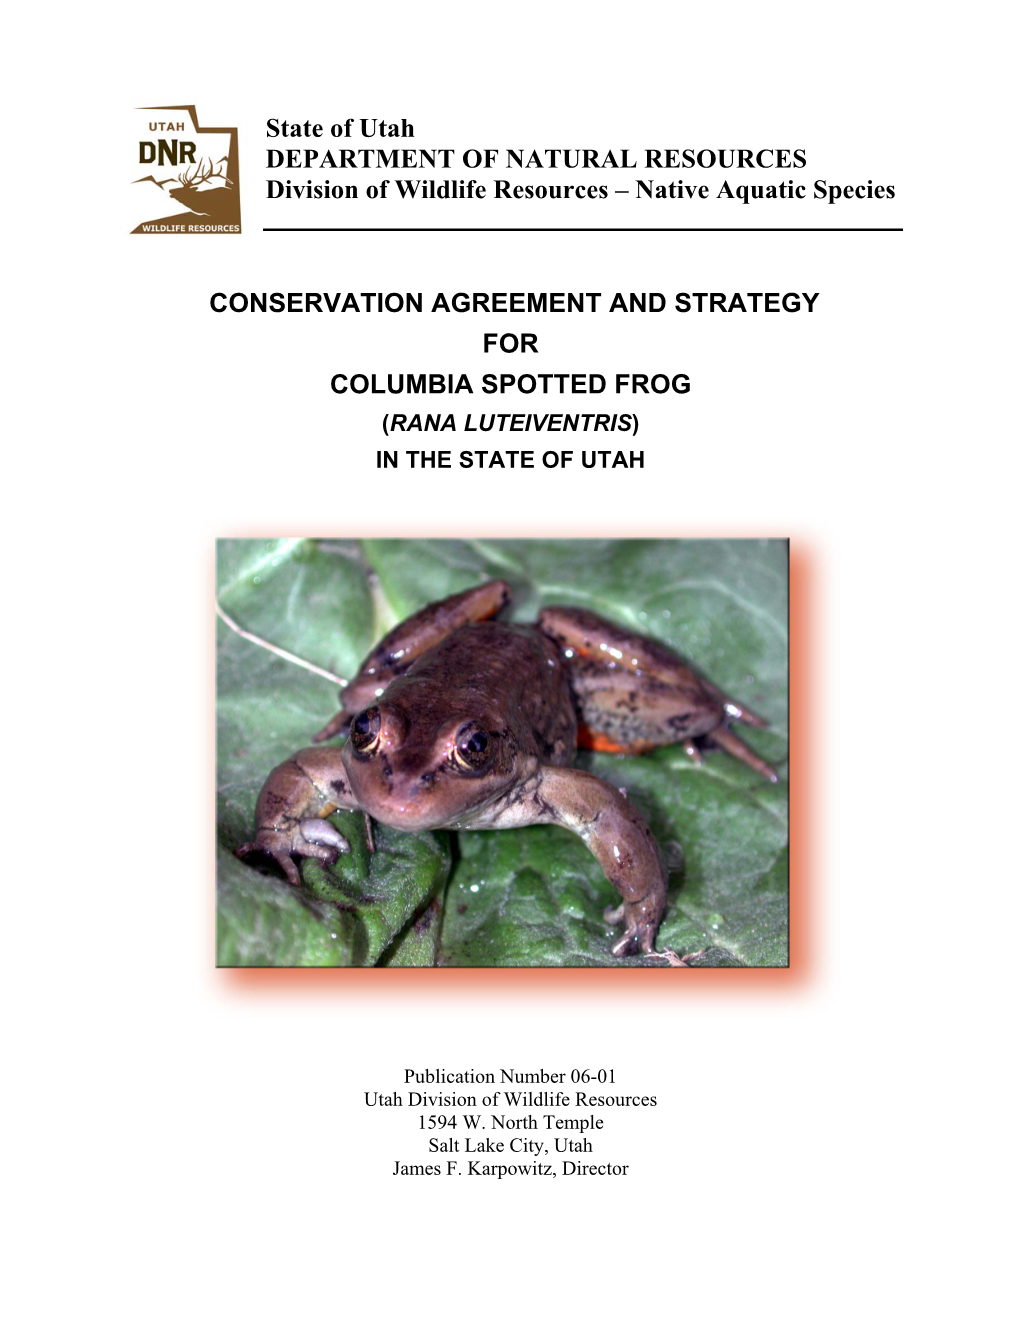 Spotted Frog Conservation Agreement and Strategy